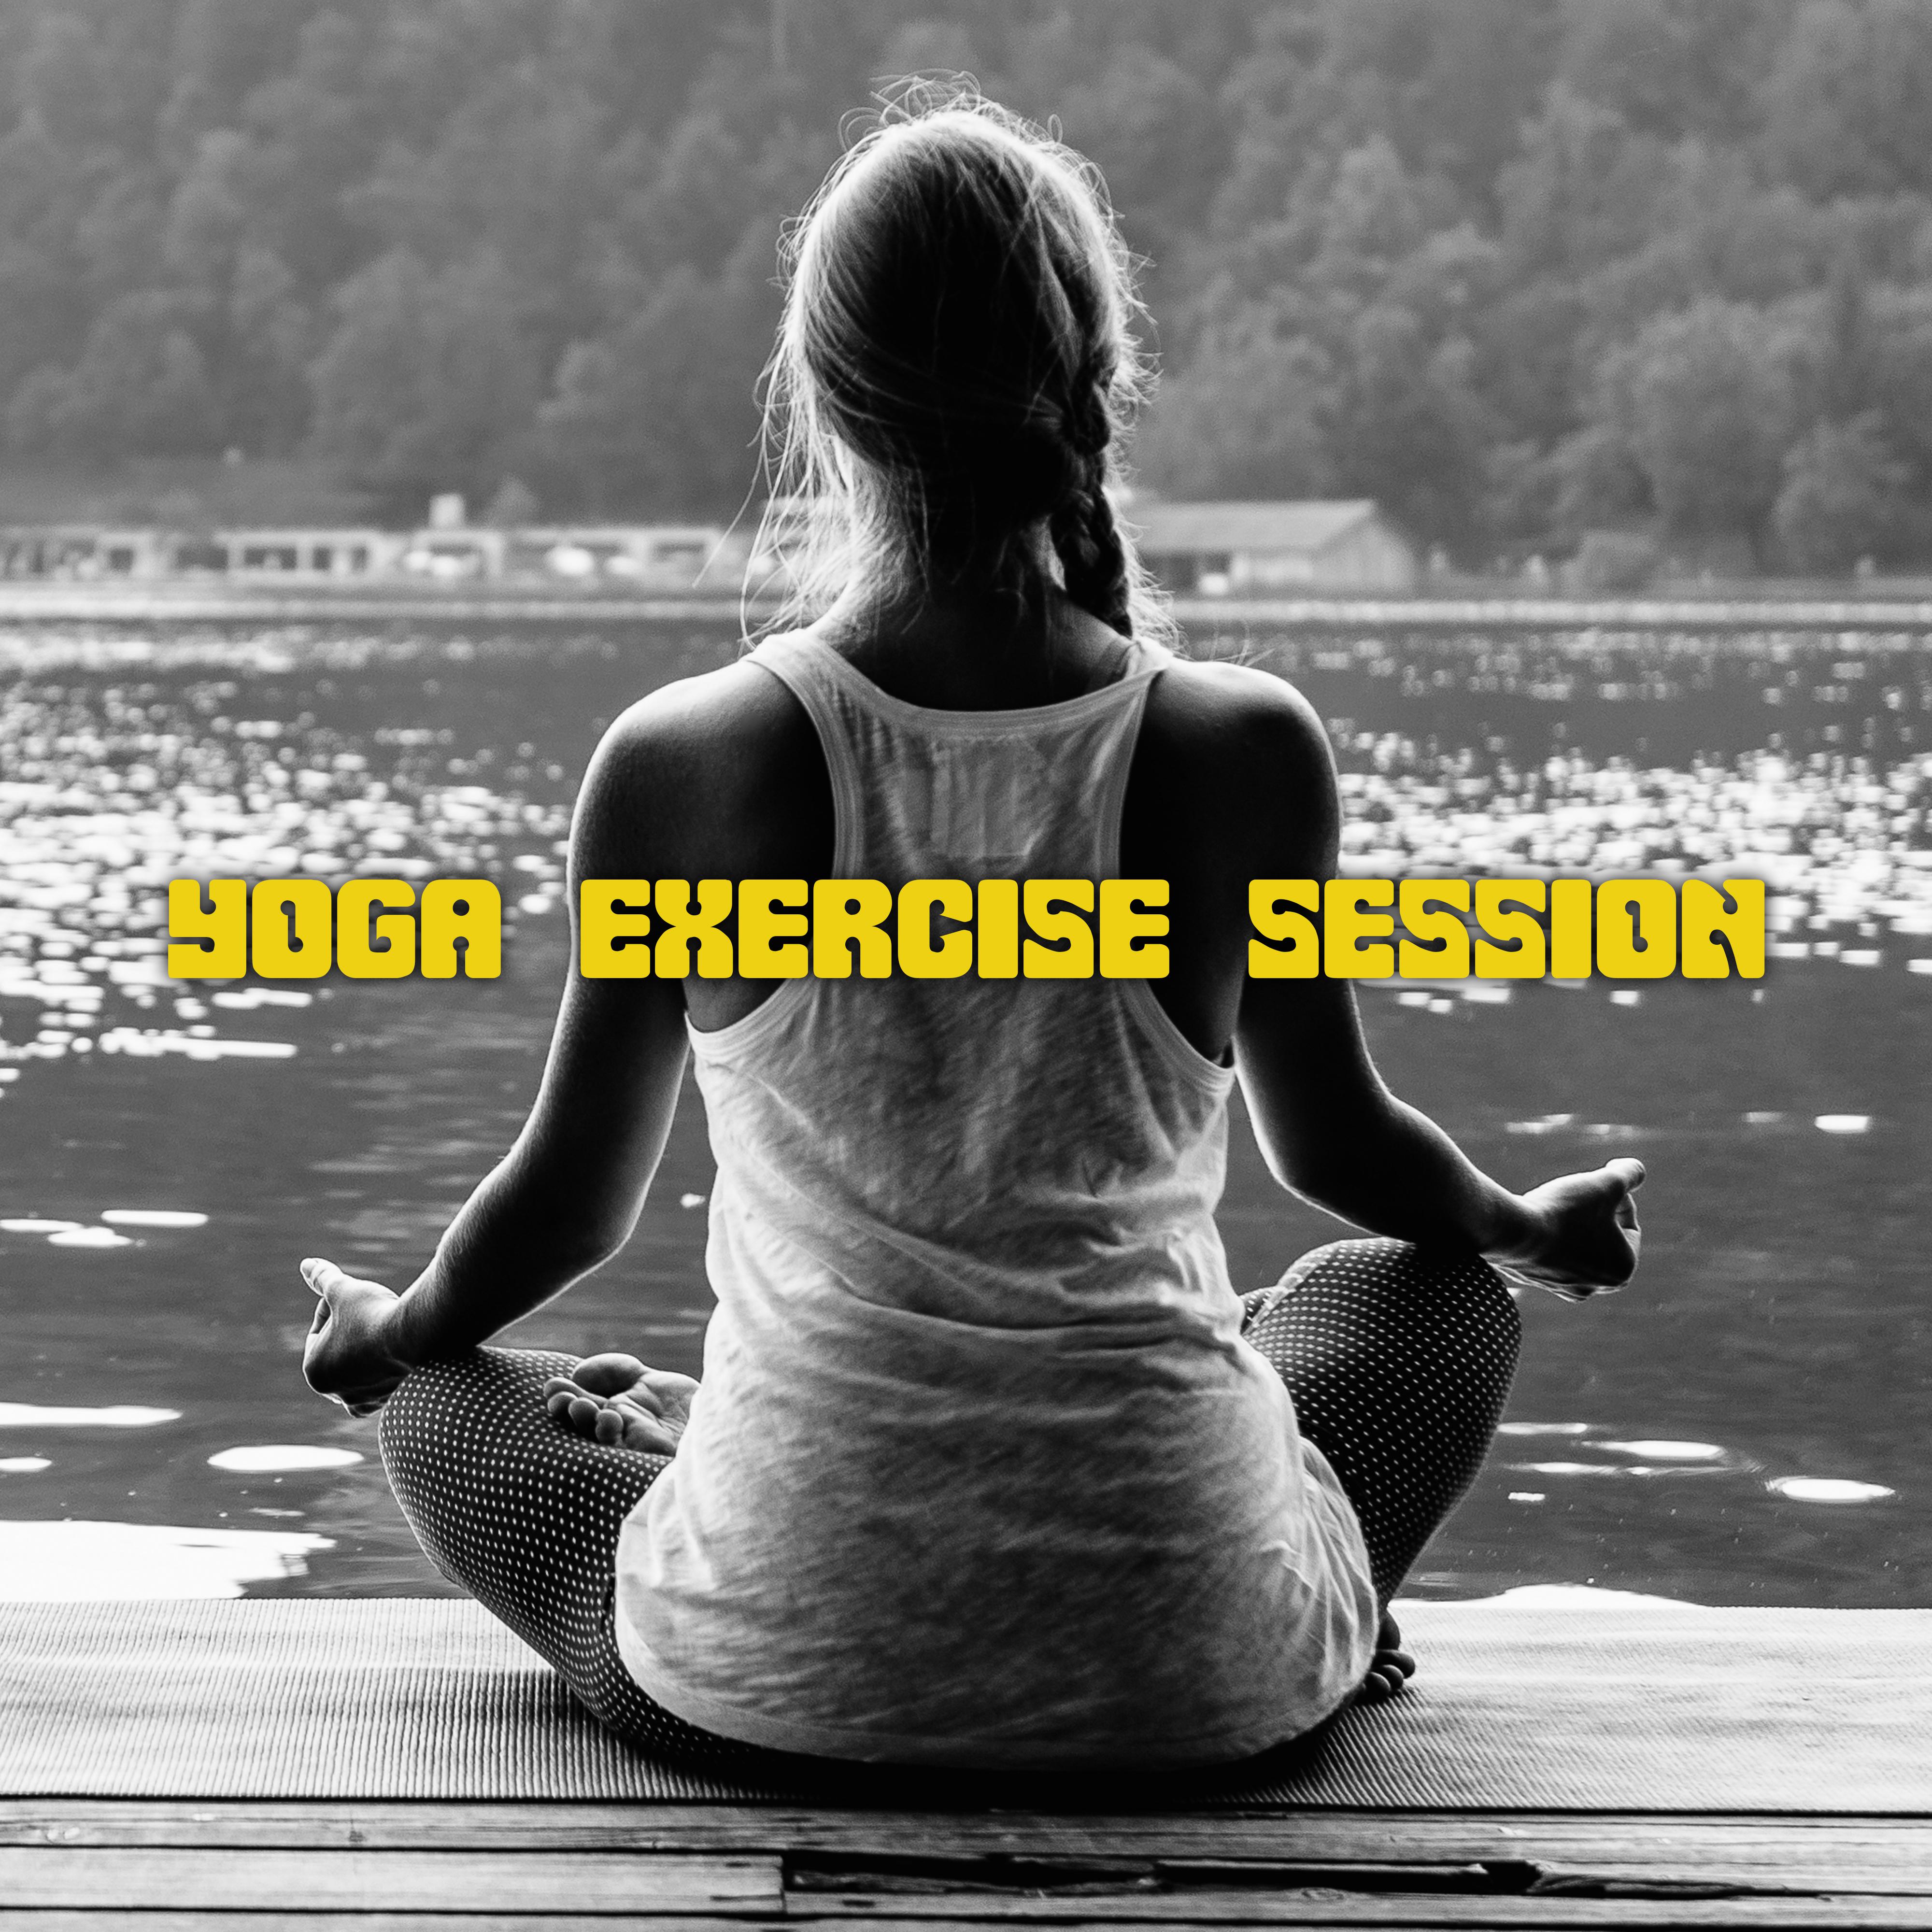 Yoga Exercise Session: Music for Almost an Hour-Long Session of Yoga, Meditation and Contemplative Practices and Exercises